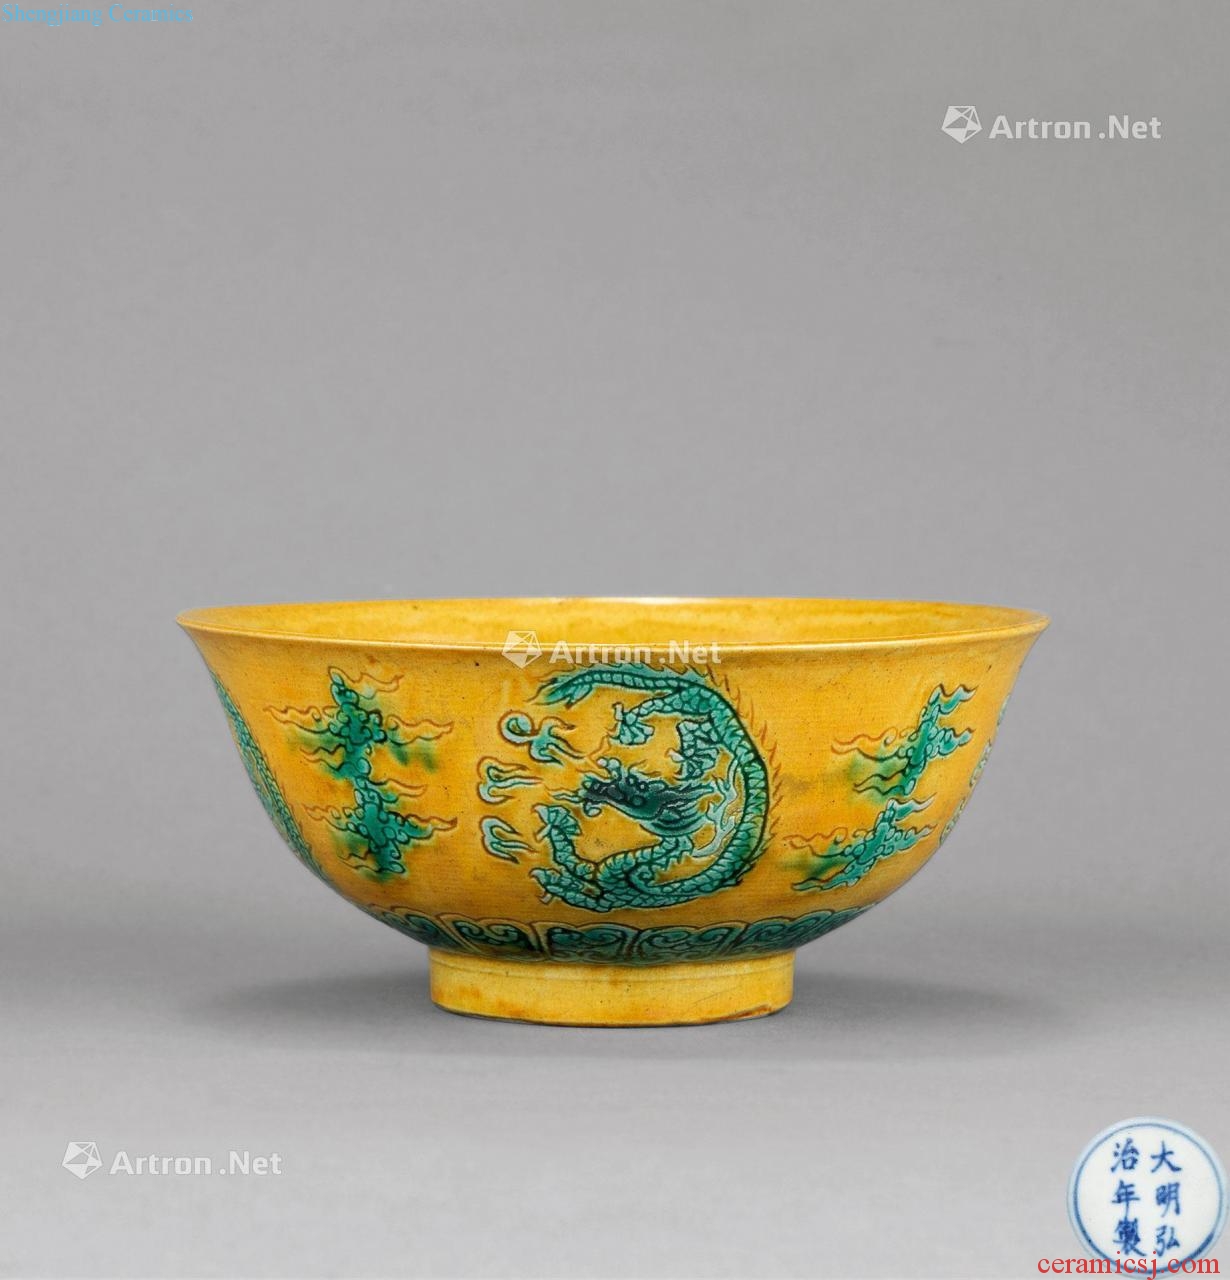 In the Ming dynasty Yellow self-identify CaiTuan dragon bowls